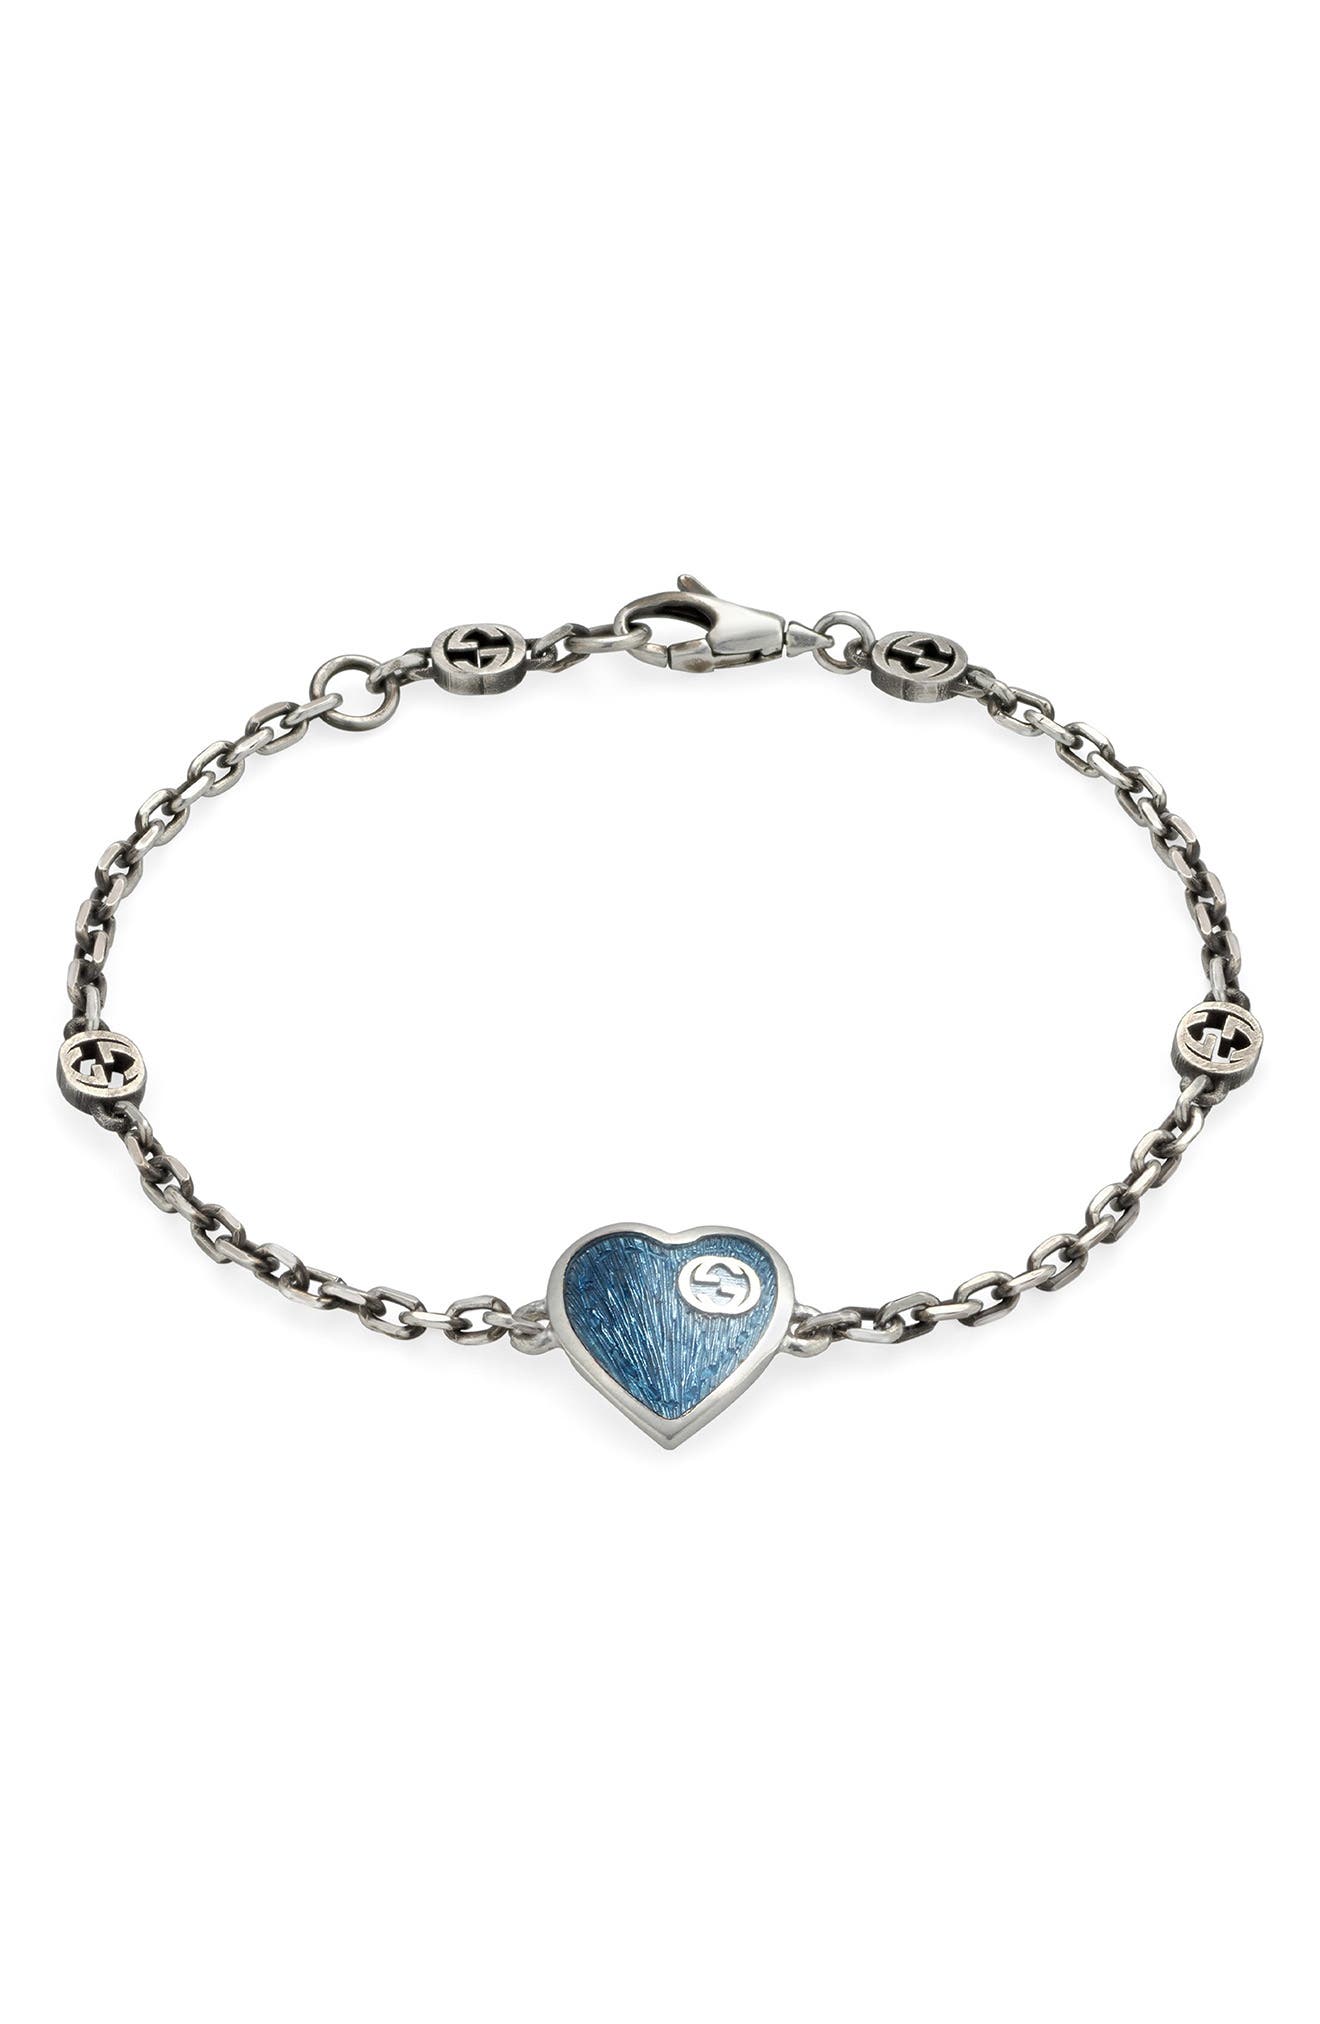 Gucci Extra Small Interlocking-G Blue Heart Bracelet in Silver/Blue at Nordstrom, Size 6.5 Us